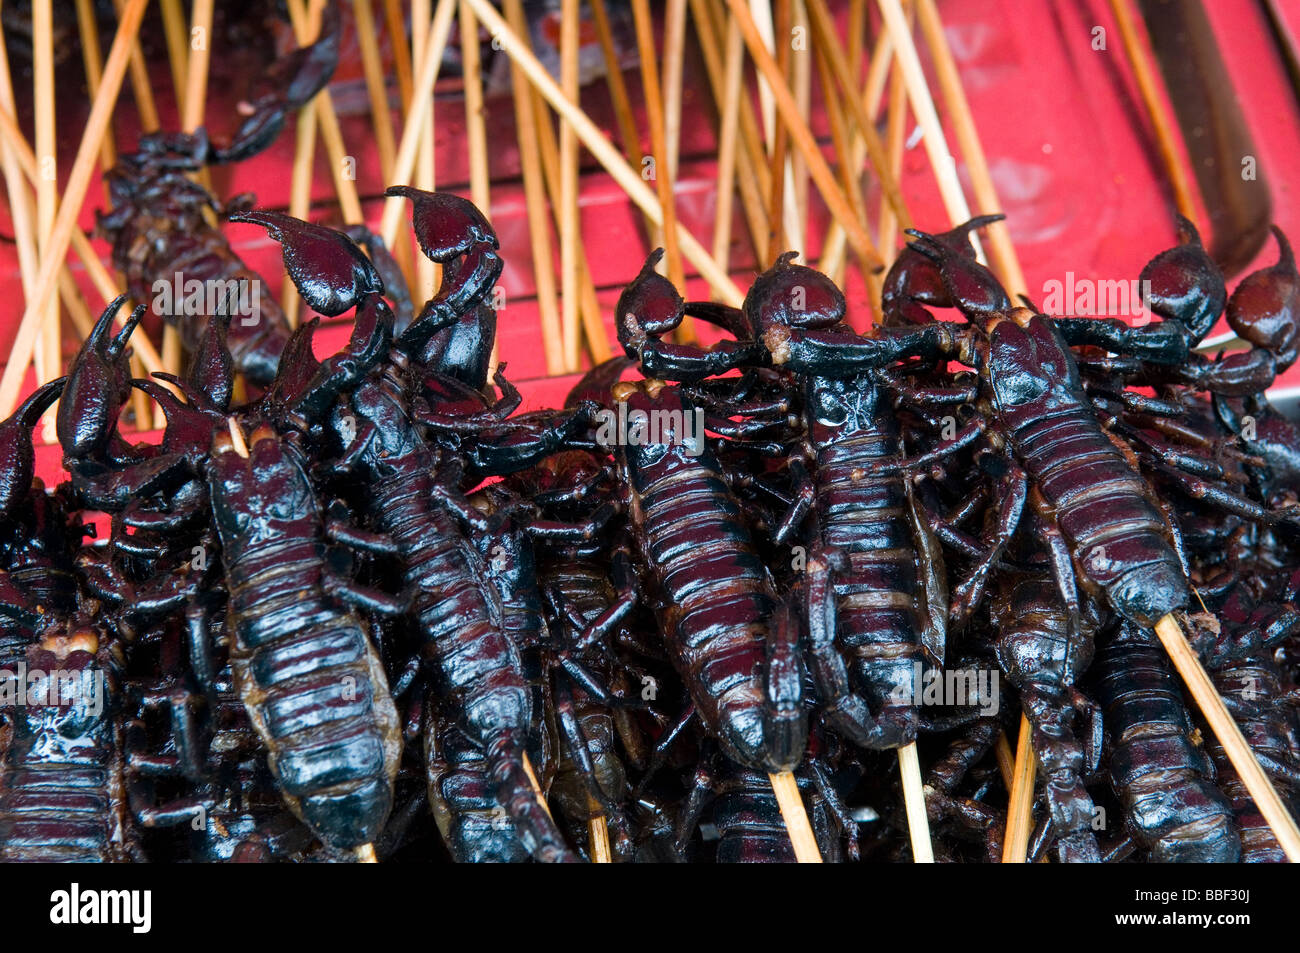 grilled-scorpians-on-skewers-served-as-s